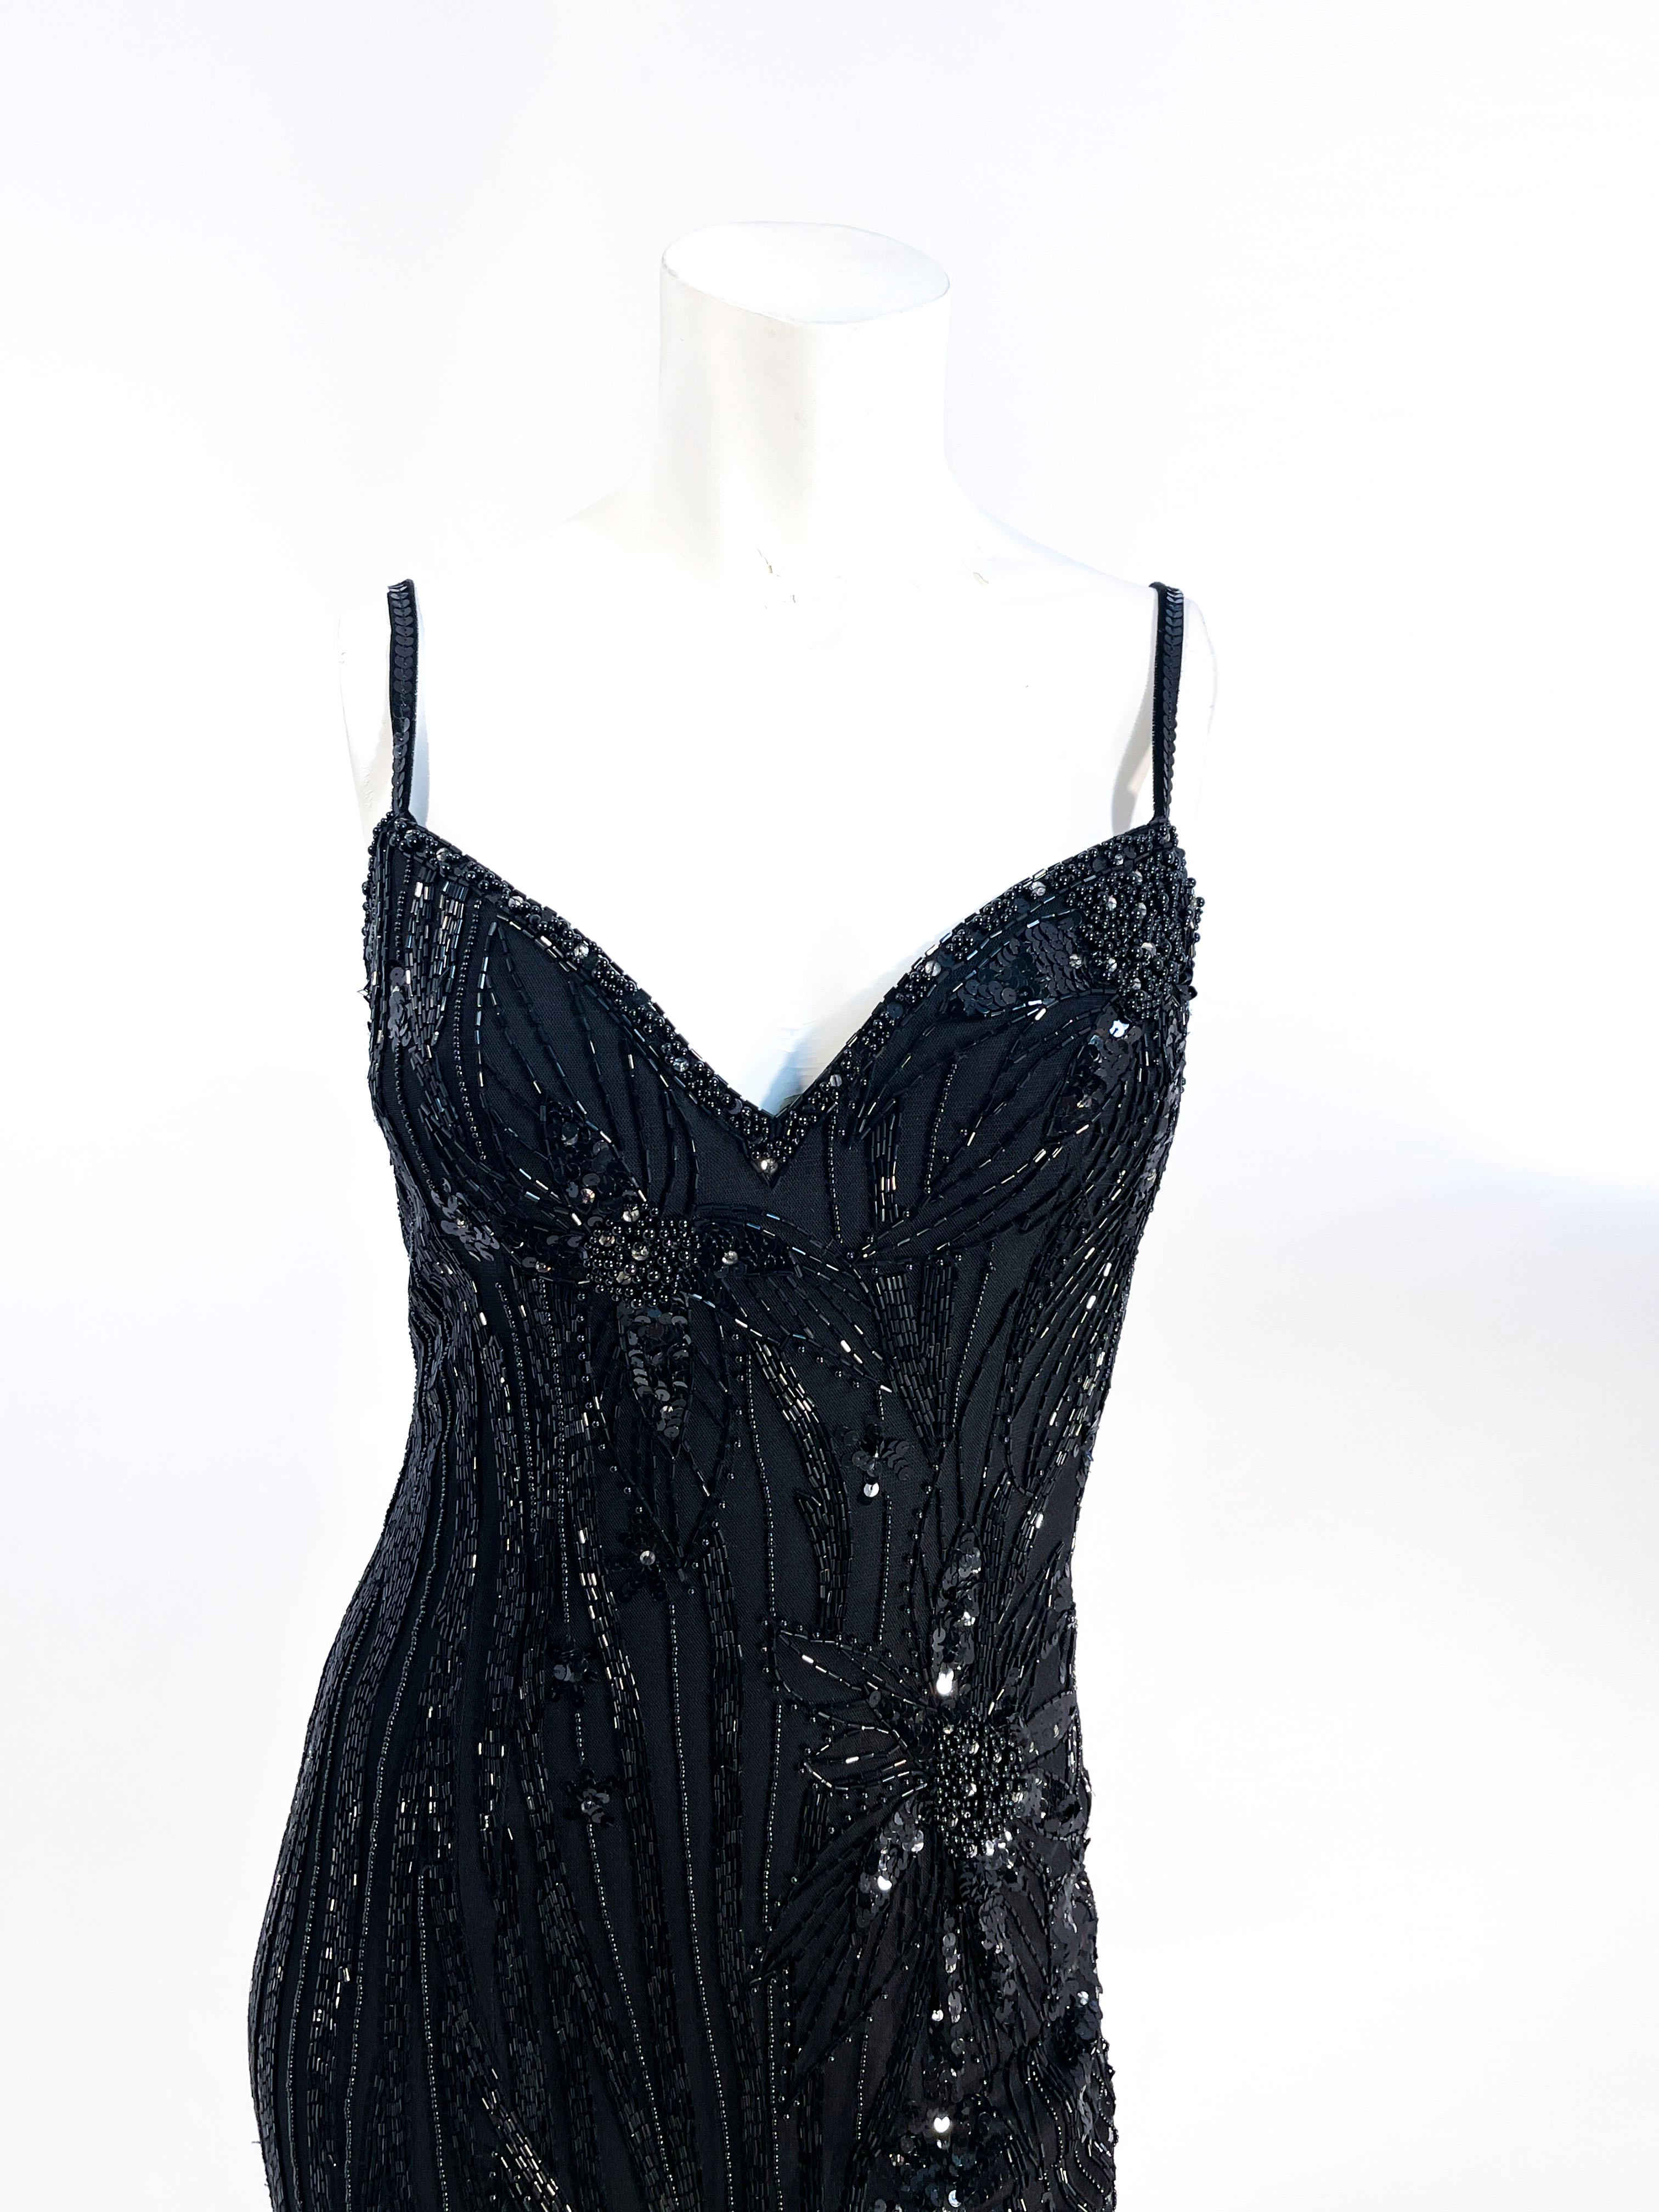 Women's 1980s Bob Mackie Black Evening Gown For Sale